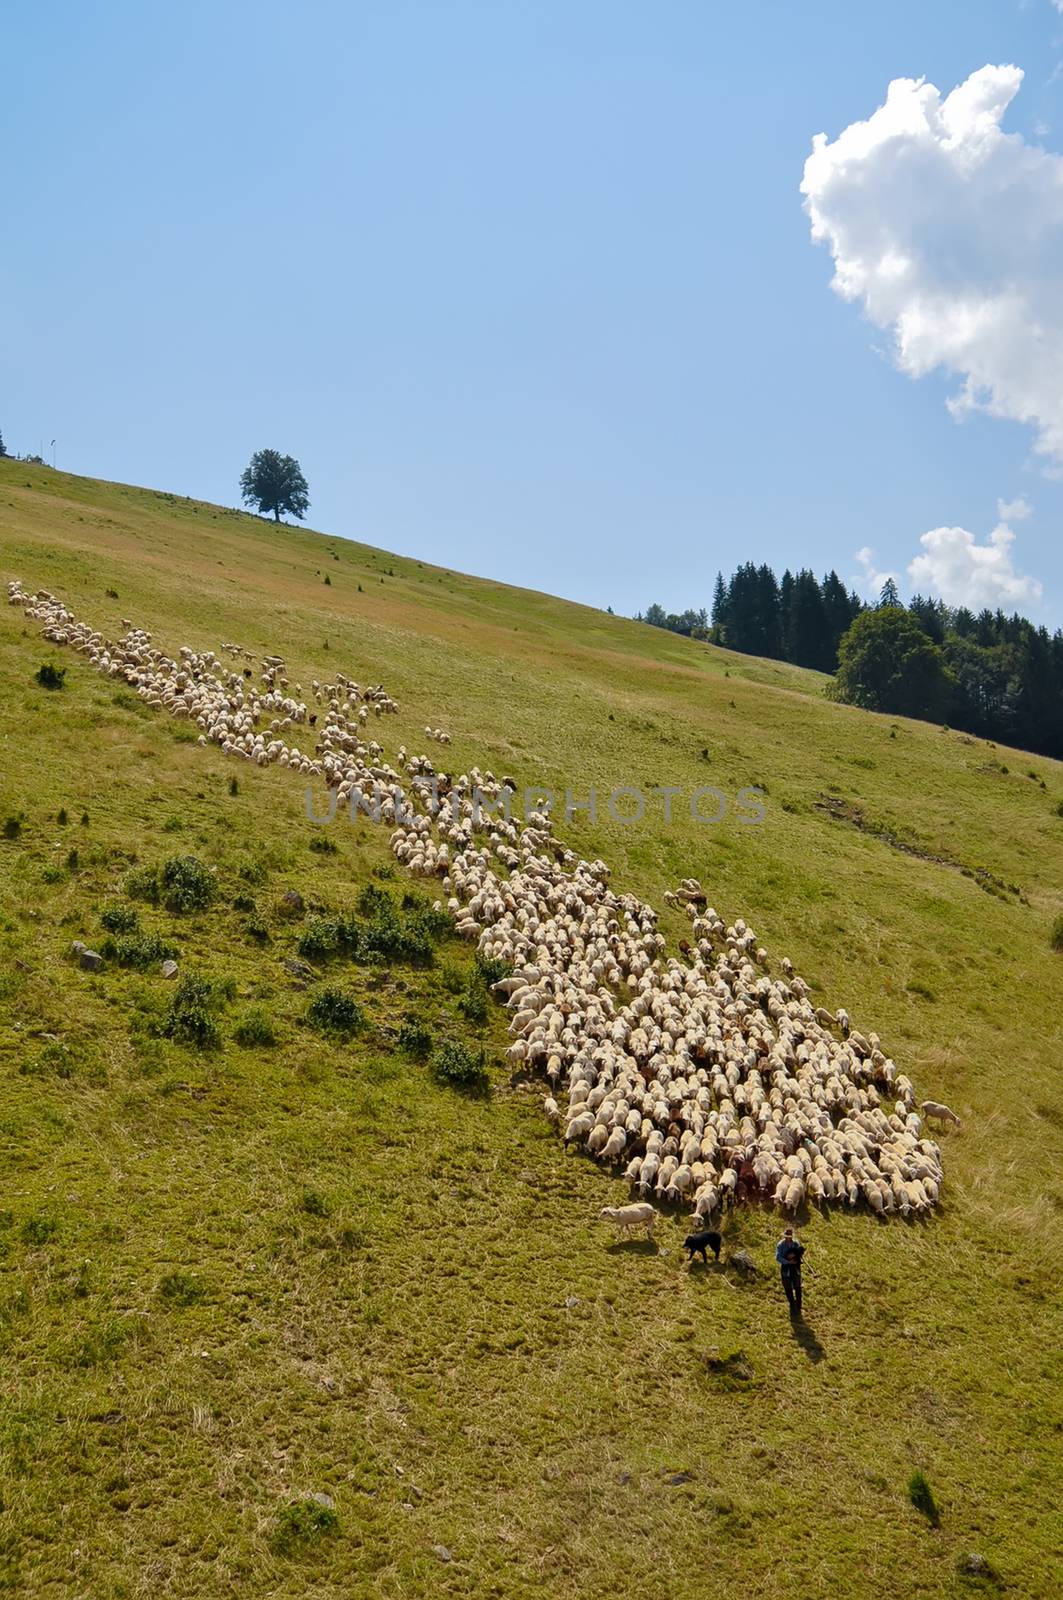 Herd of sheep on a mountain pasture .